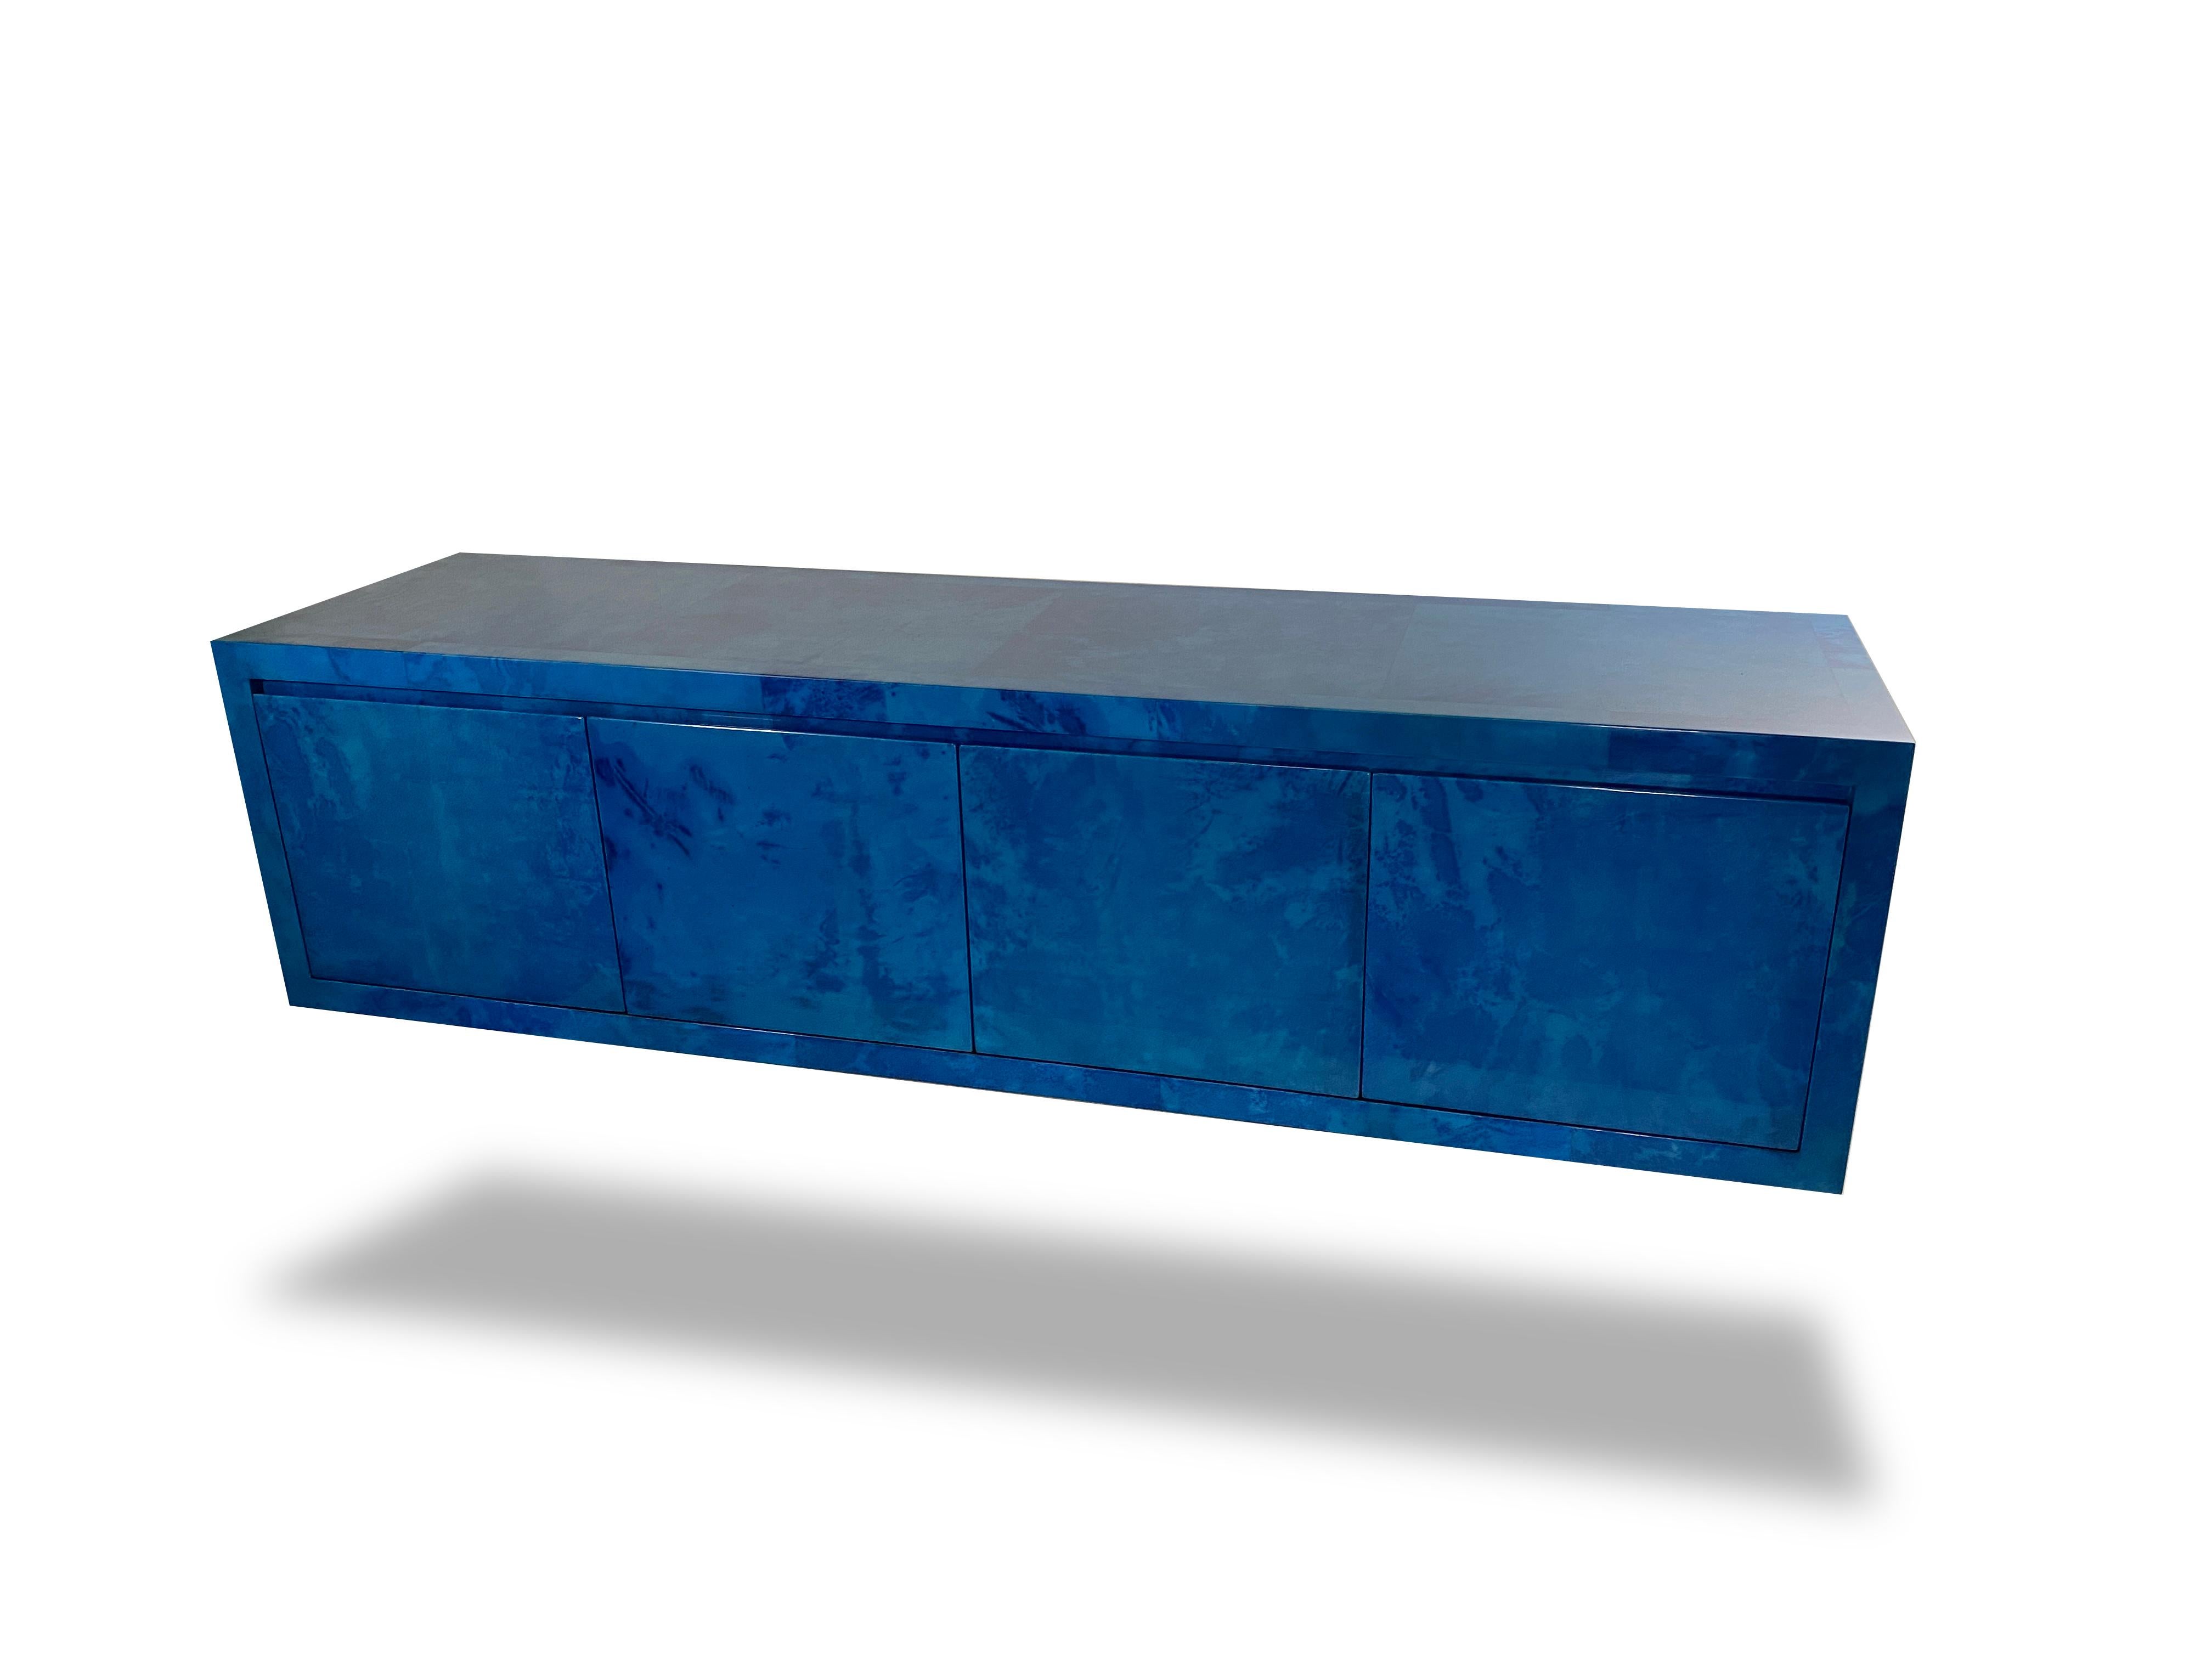 We are authorized reps on Karl Springer LTD. A Lapis goatskin 4 door server/credenza, each door opens to reveal a drawer and shelves. We can custom create this piece in 12 colorways and size. Handpolished poly-lacquered with a cerused interior